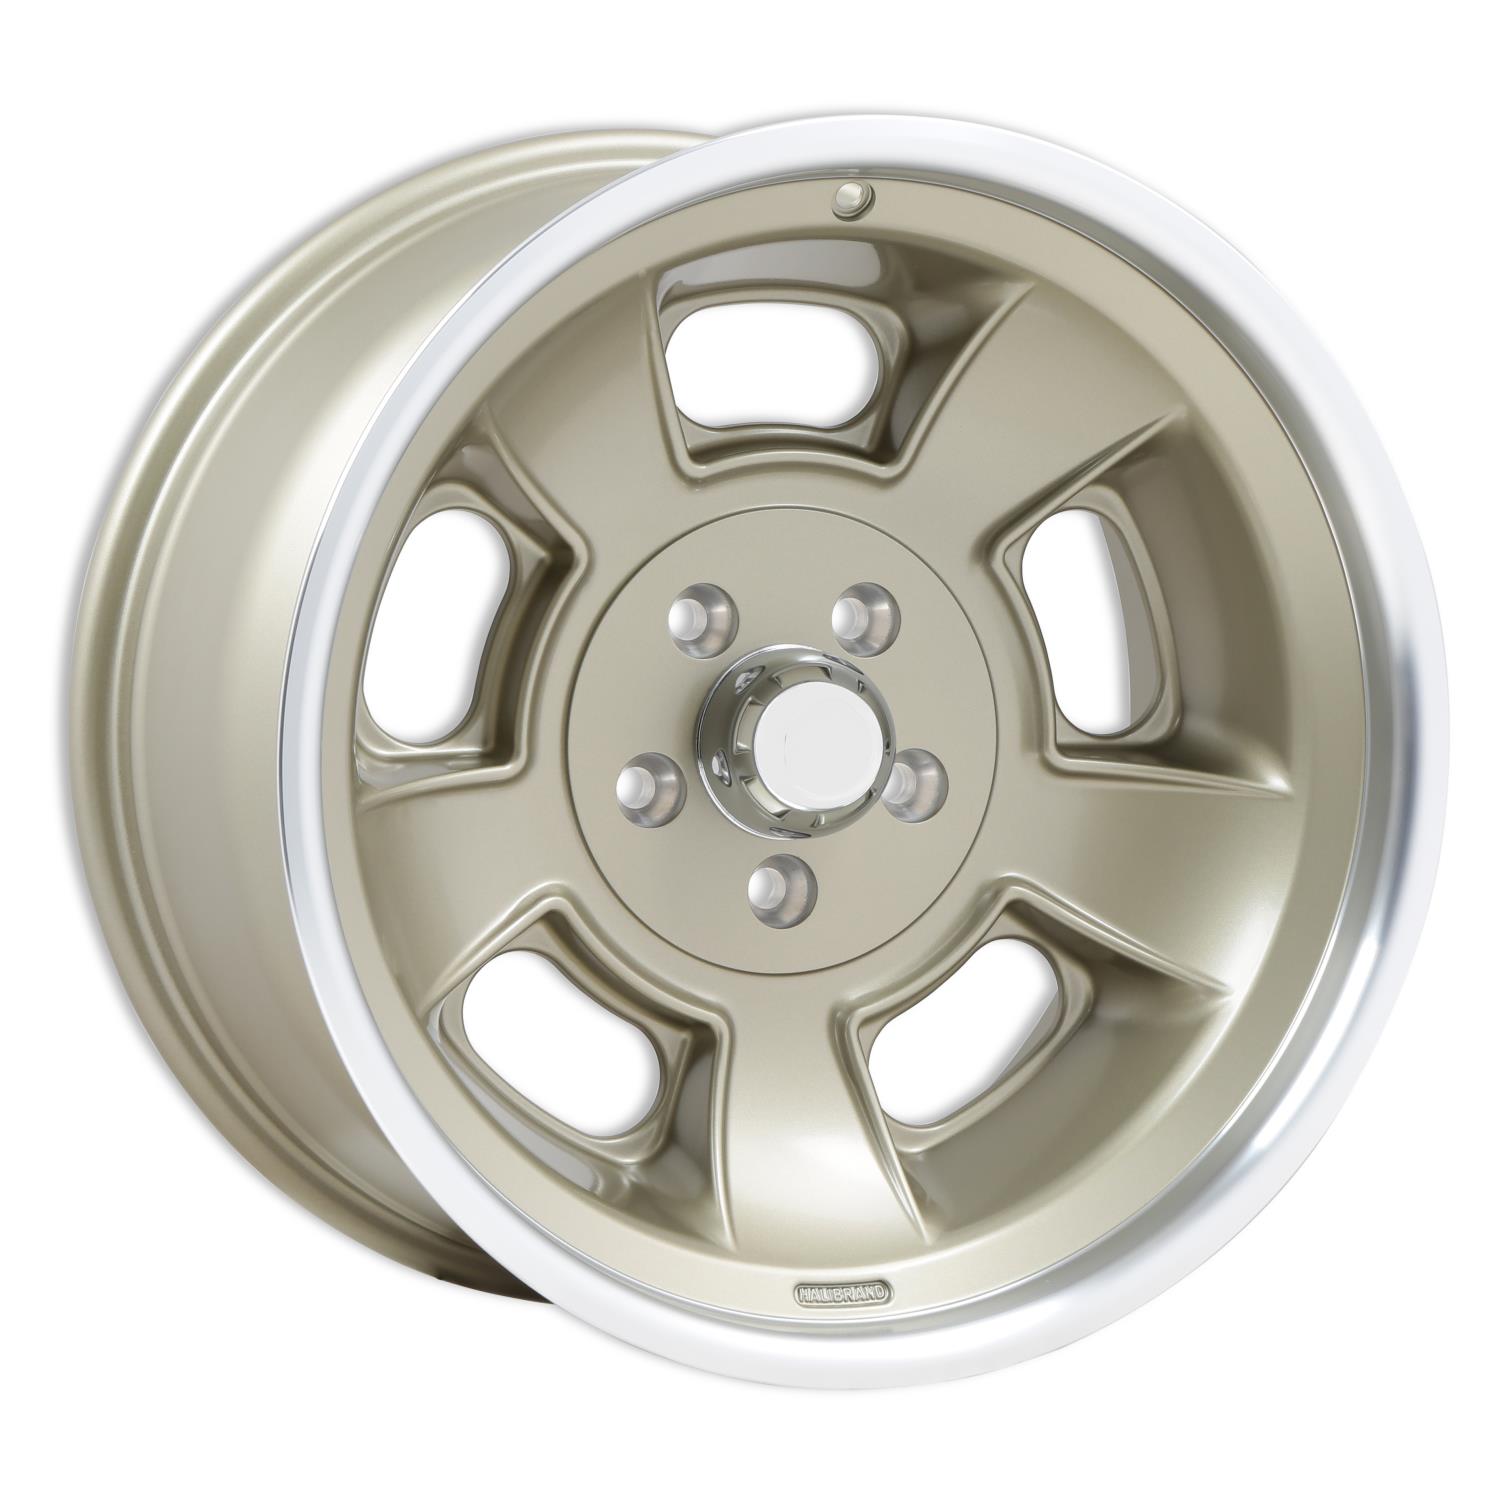 Sprint Rear Wheel, Size: 19x10", Bolt Pattern: 5x5", Backspace: 5.5" [MAG7 with Machined Lip - Semi Gloss Clearcoat]